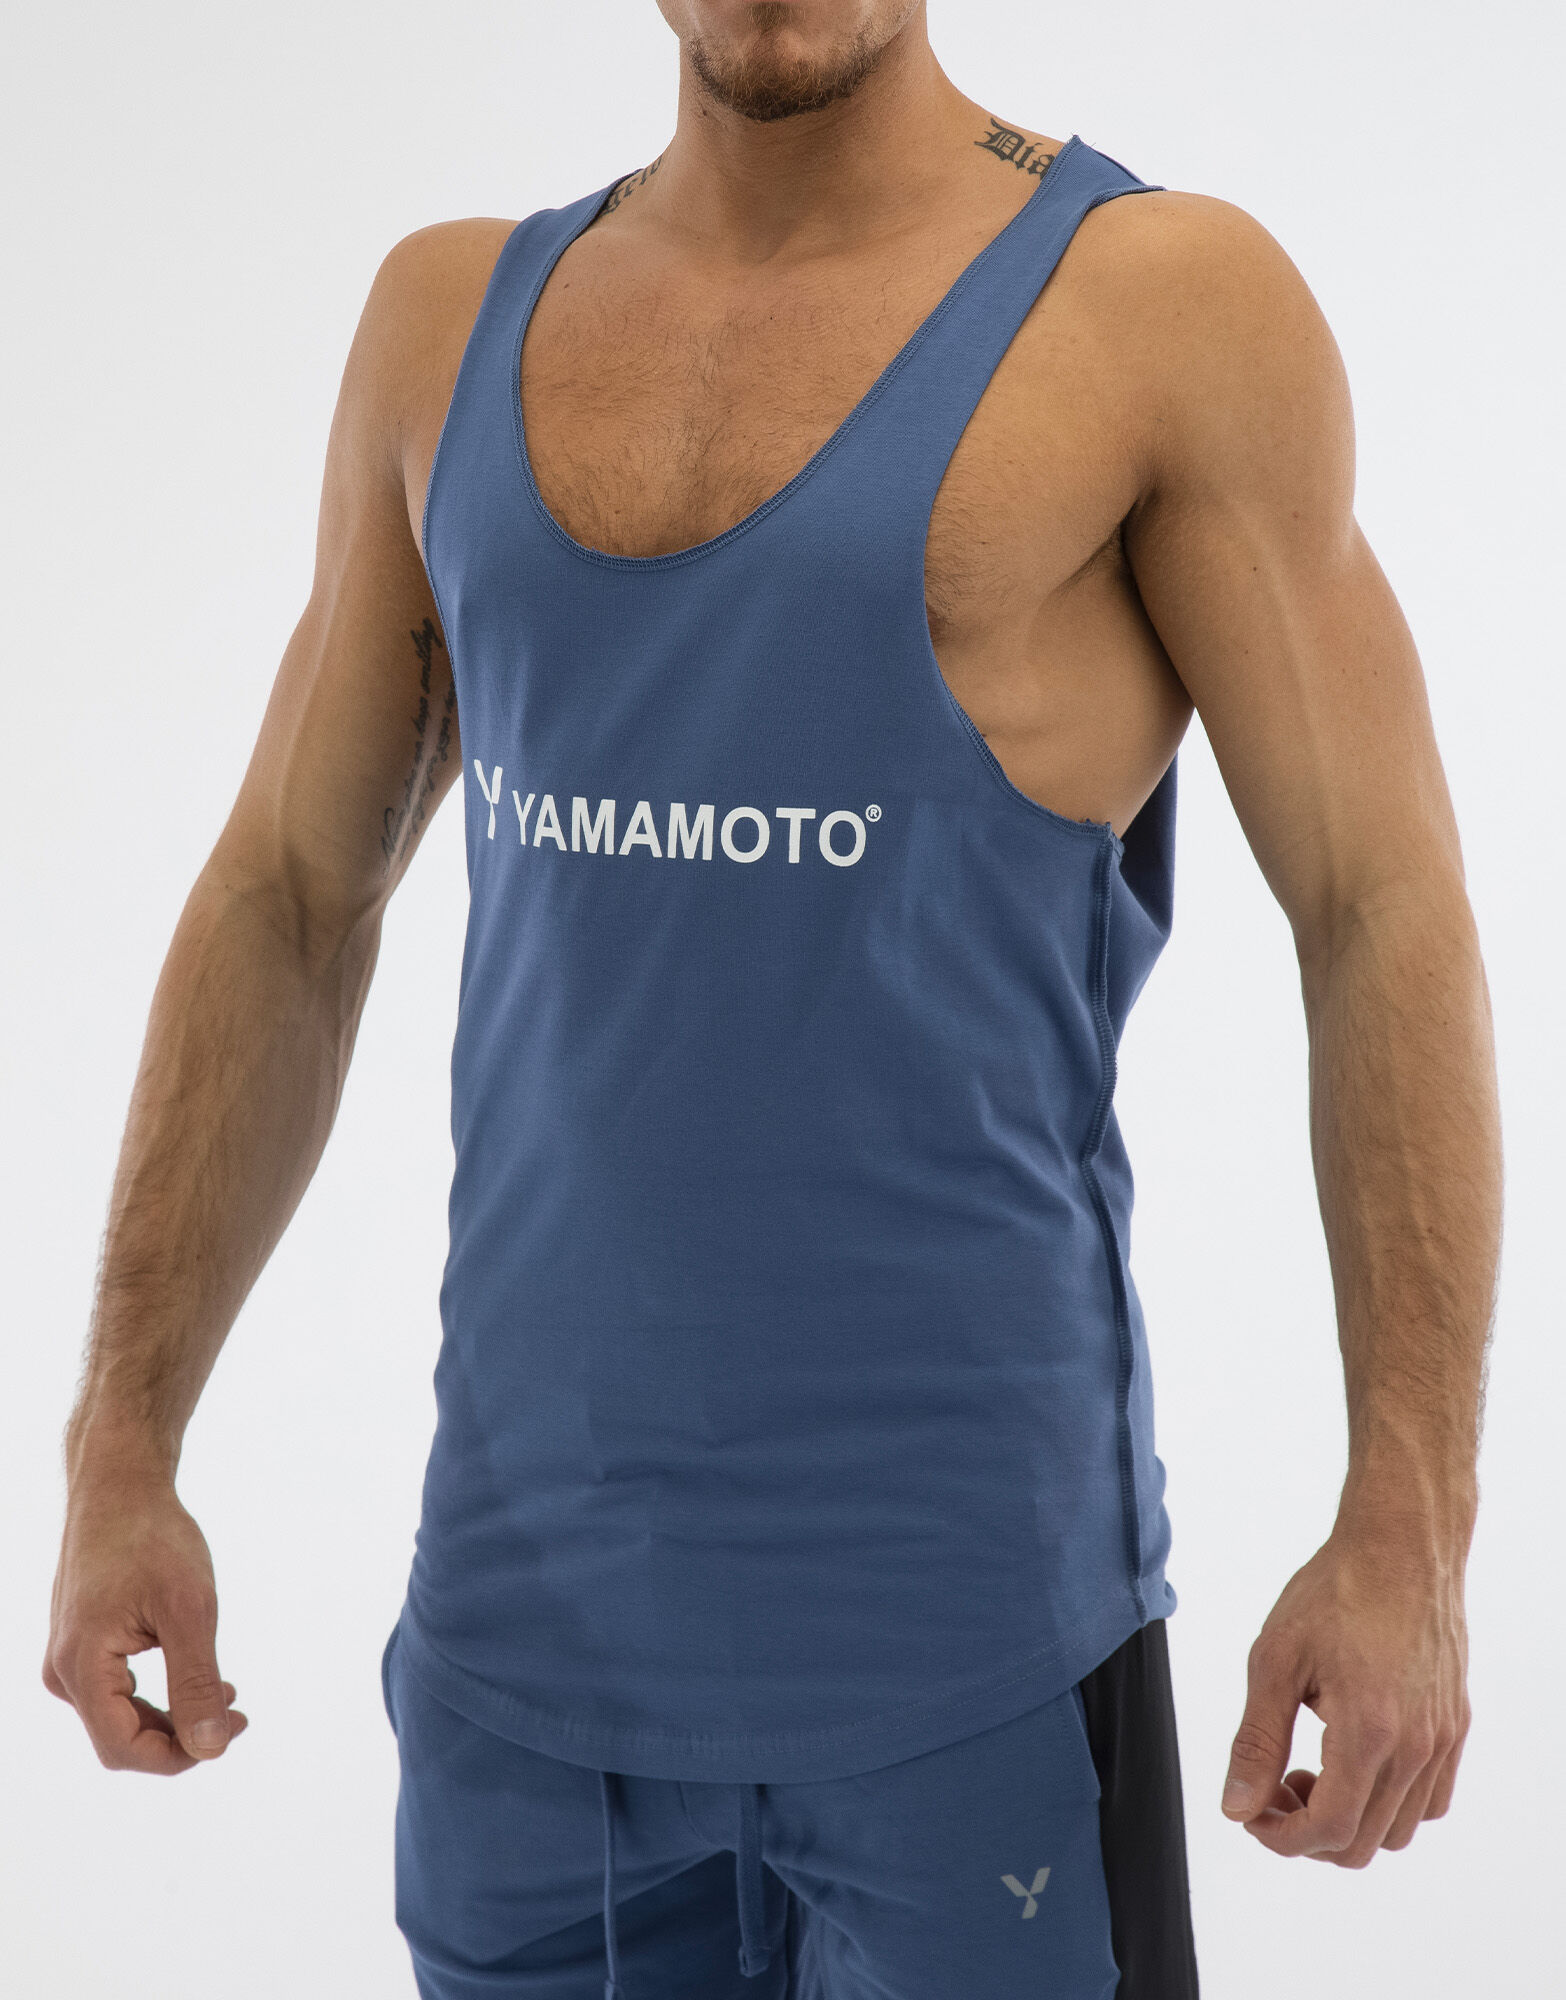 YAMAMOTO OUTFIT Man Tank Top Wide Shoulder Colore: Blu Xl